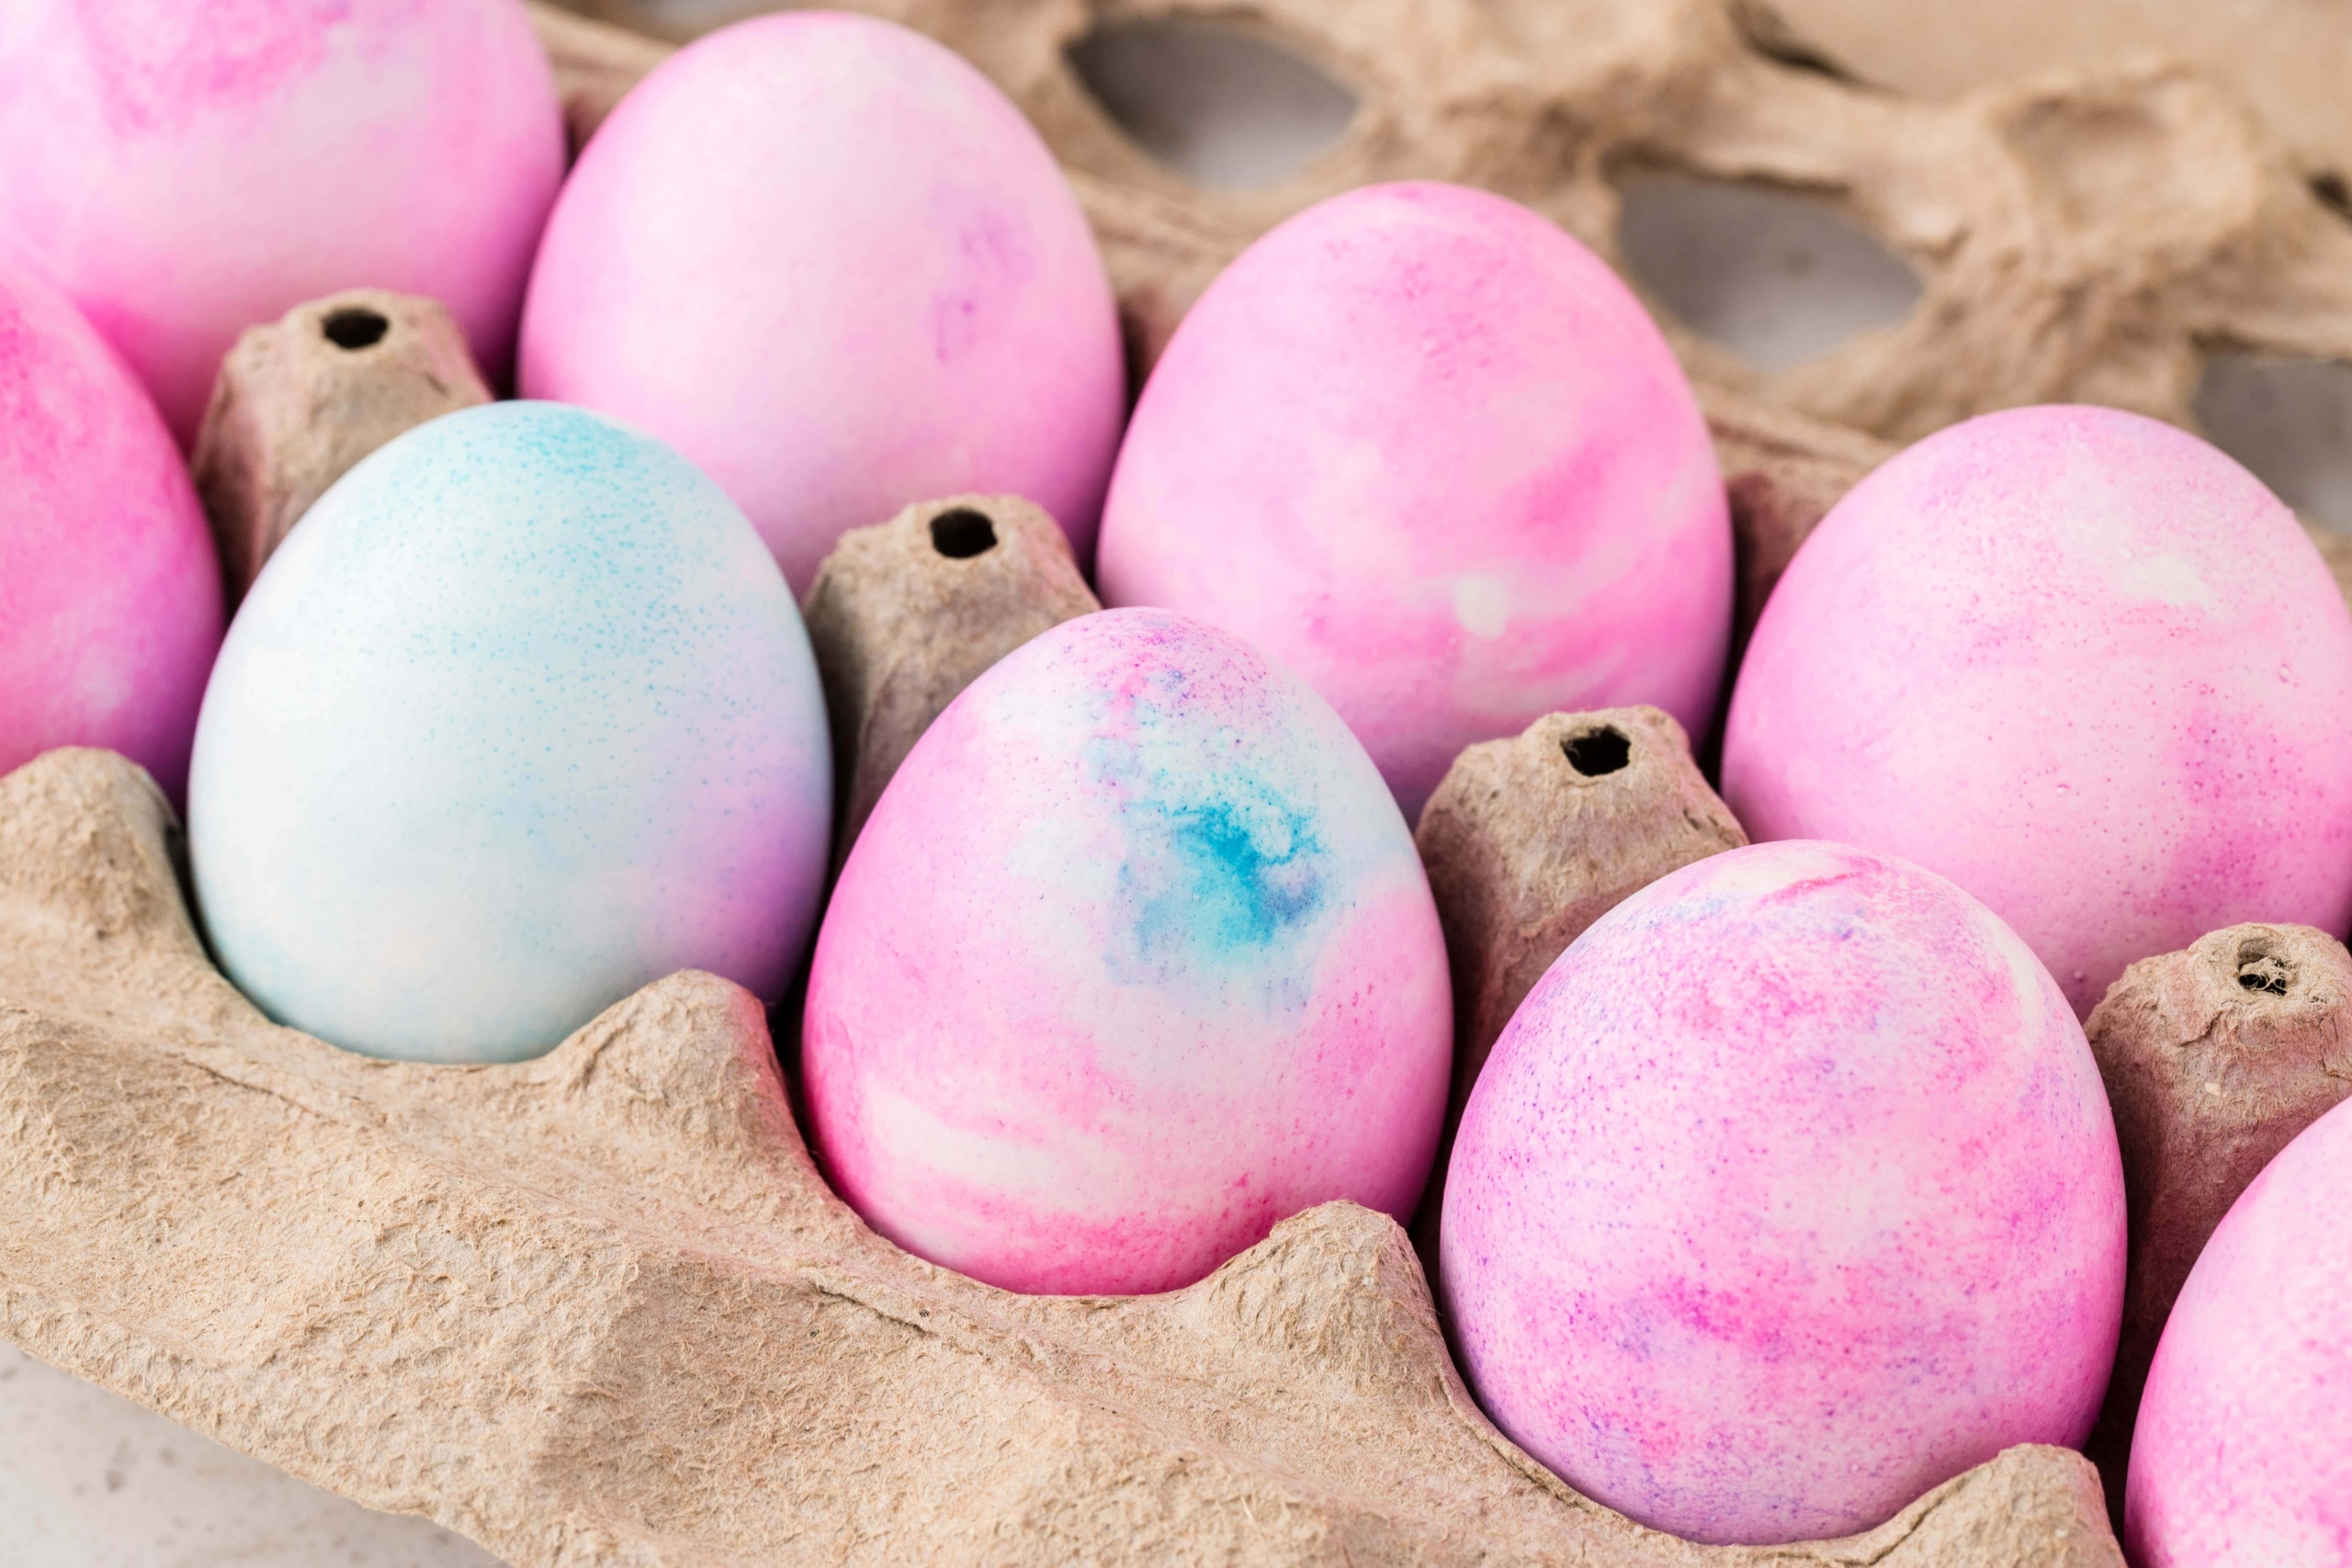 Completed Easter Eggs displayed in an Egg Carton